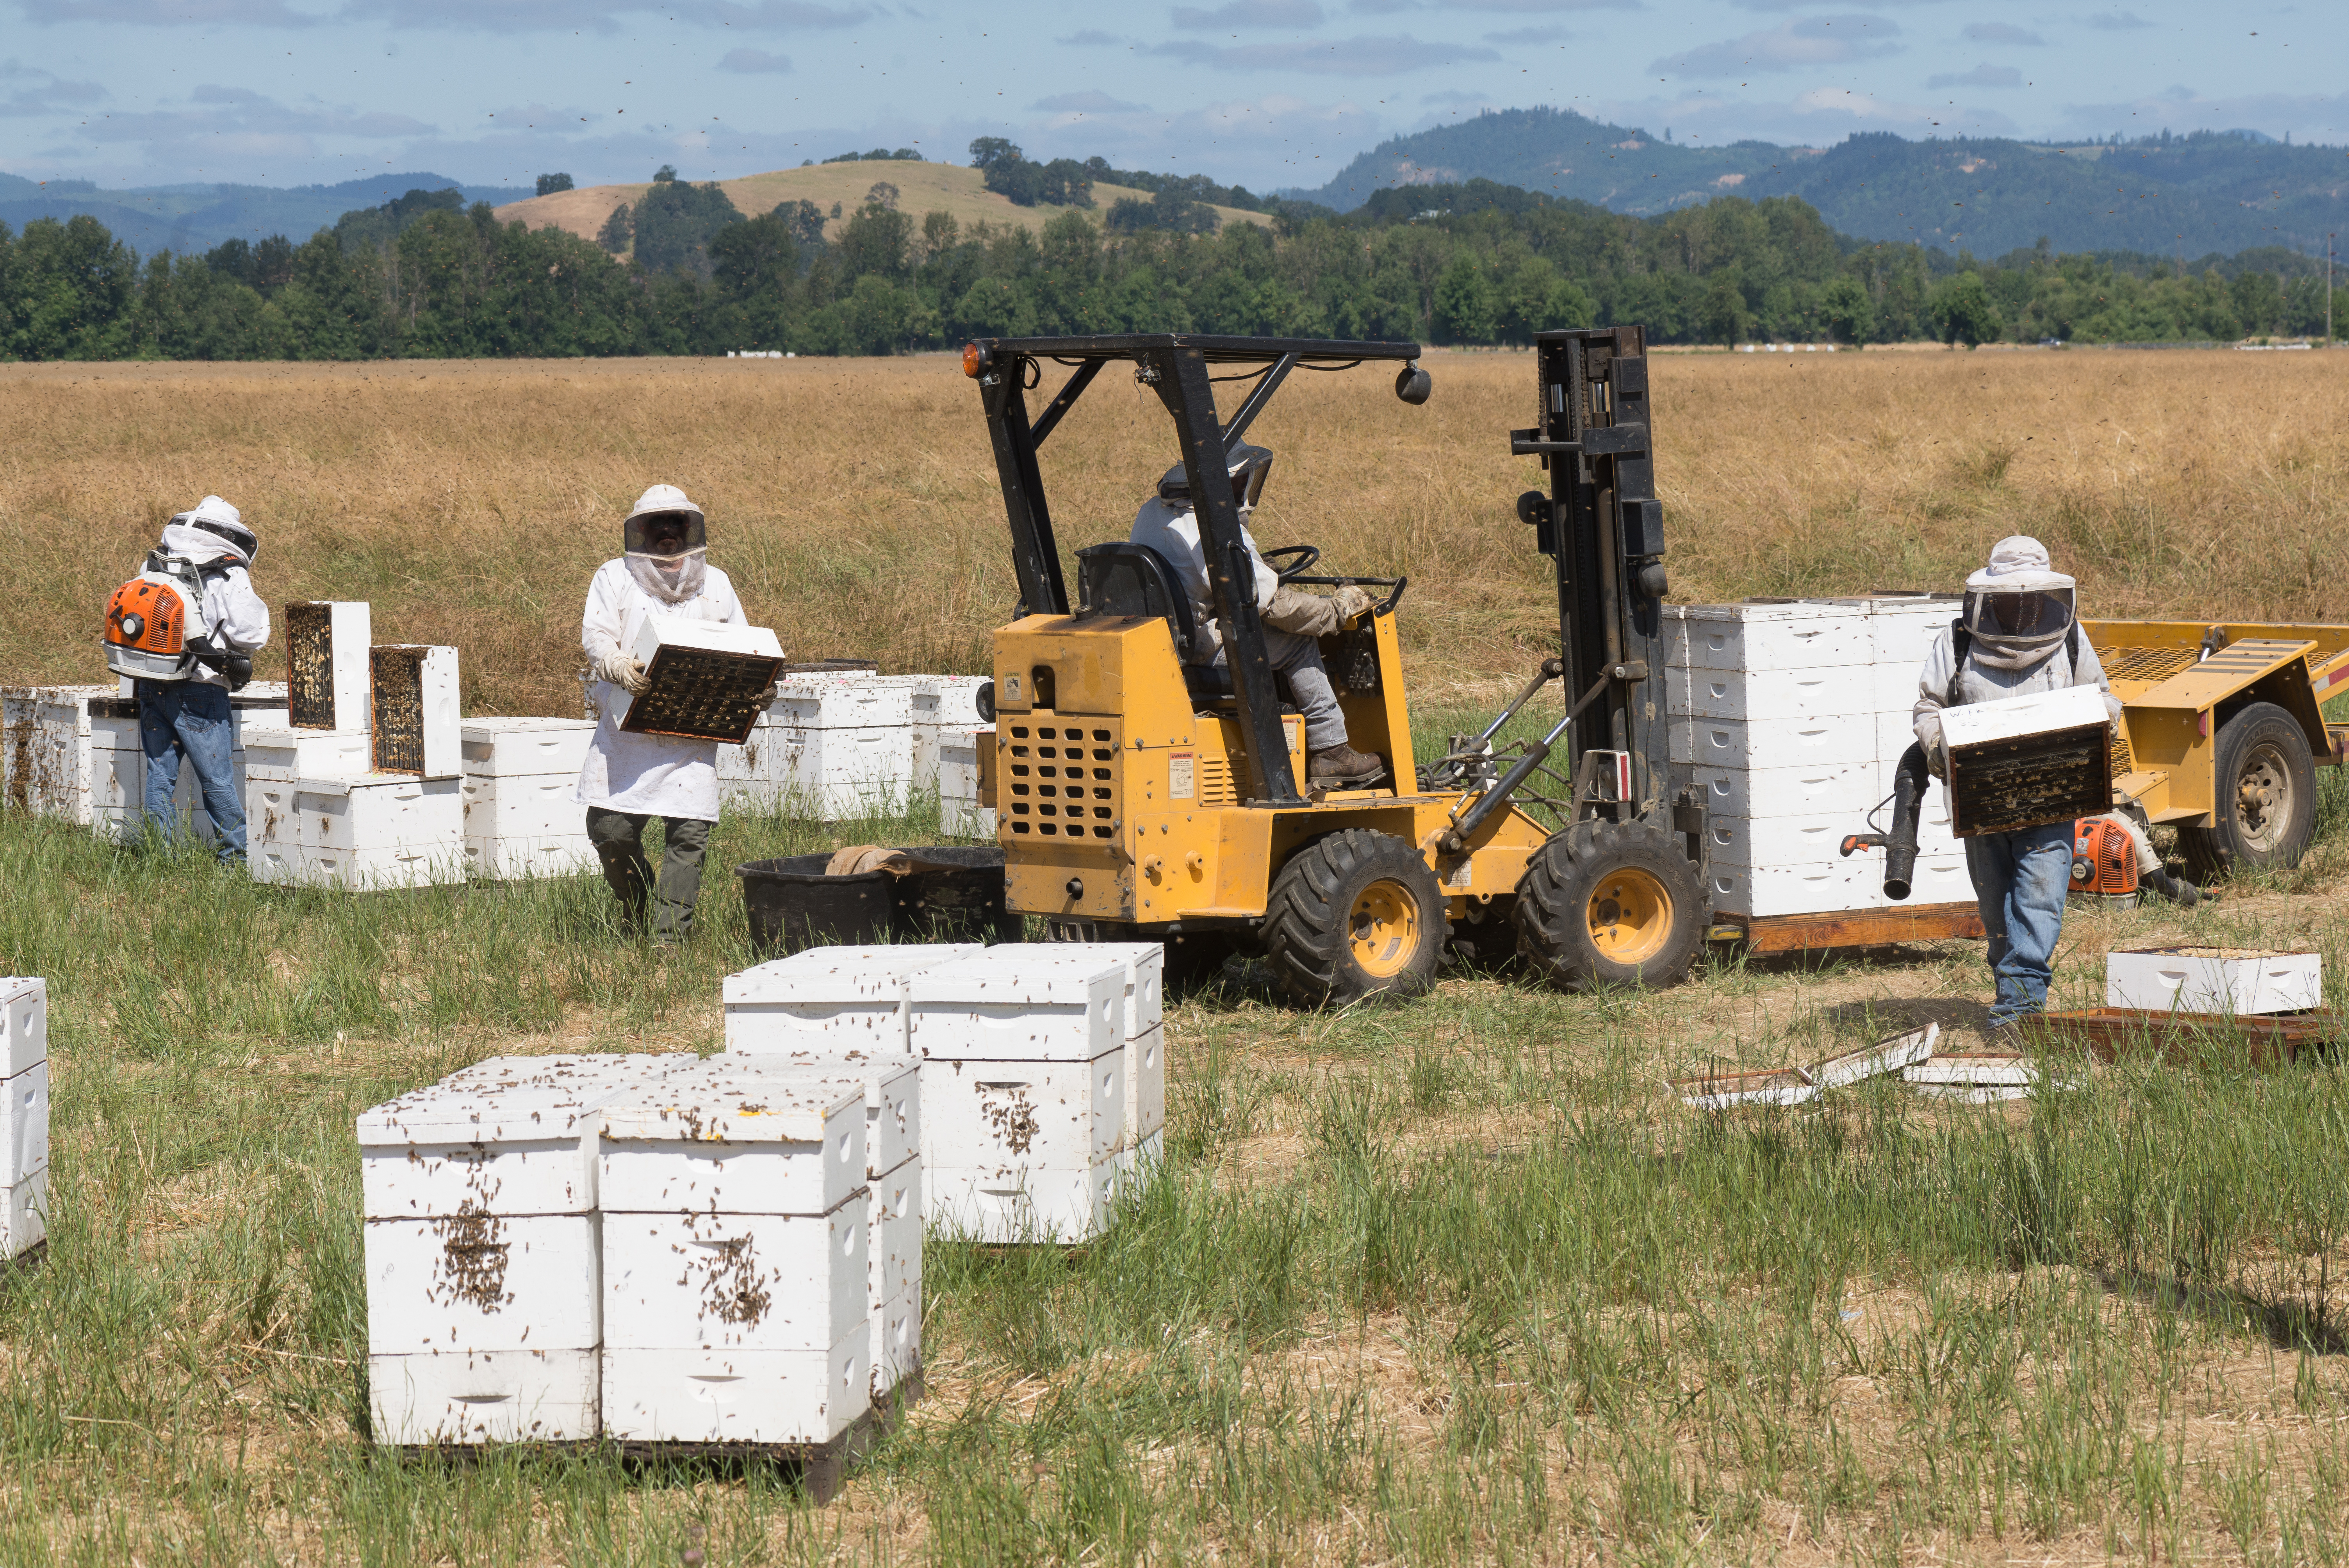 Commercial beekeepers collect their hives and honey frames after crop pollination is complete.